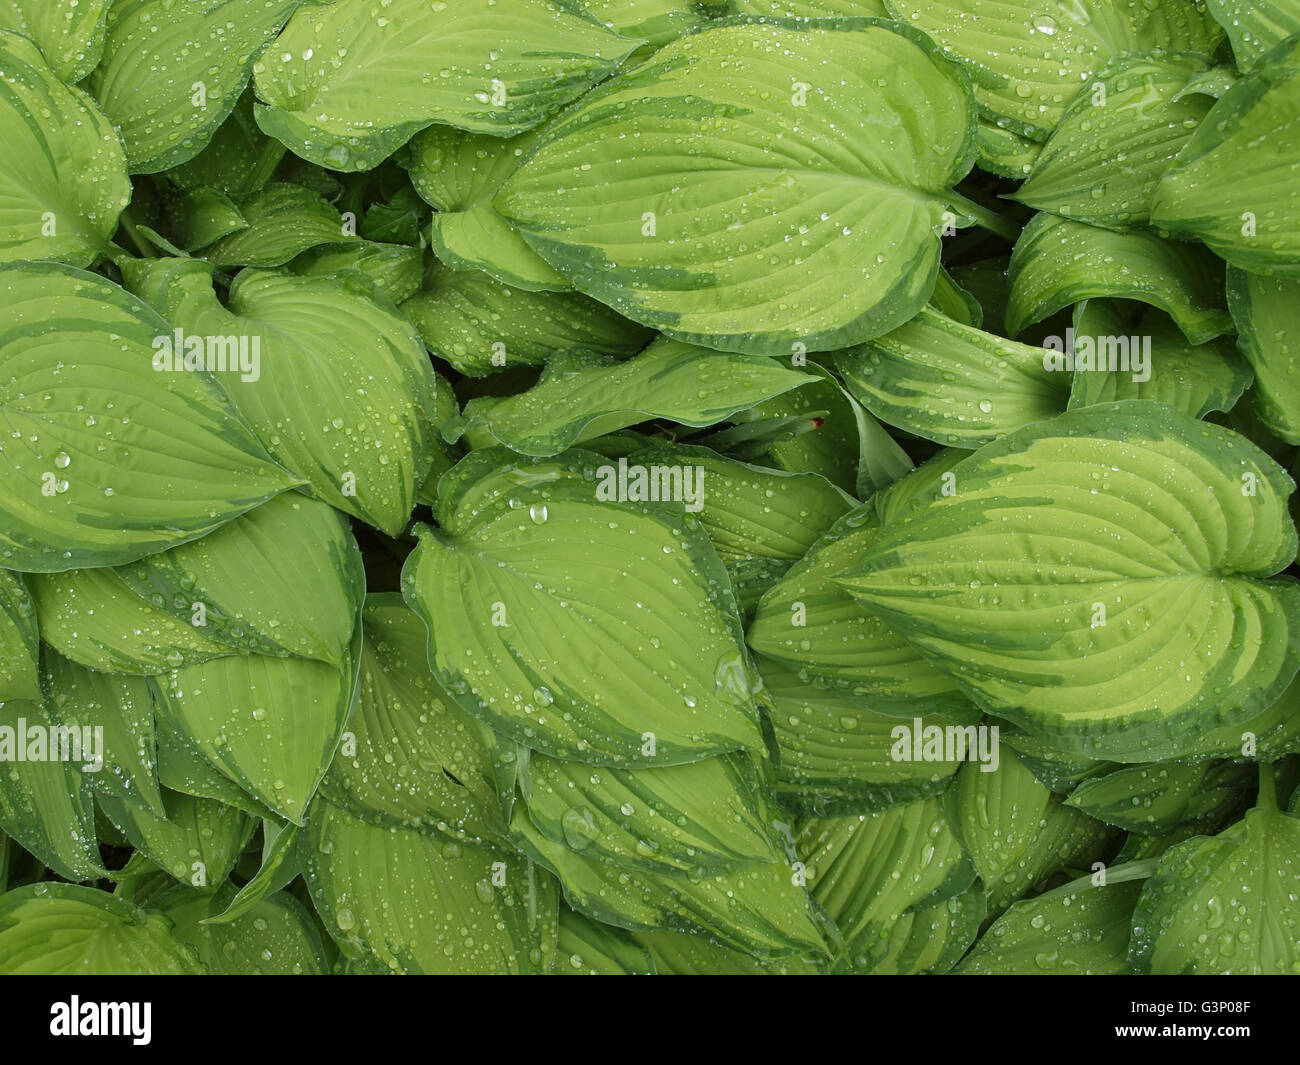 bright green hosta leaves with thirst-quenching droplets of water Stock Photo